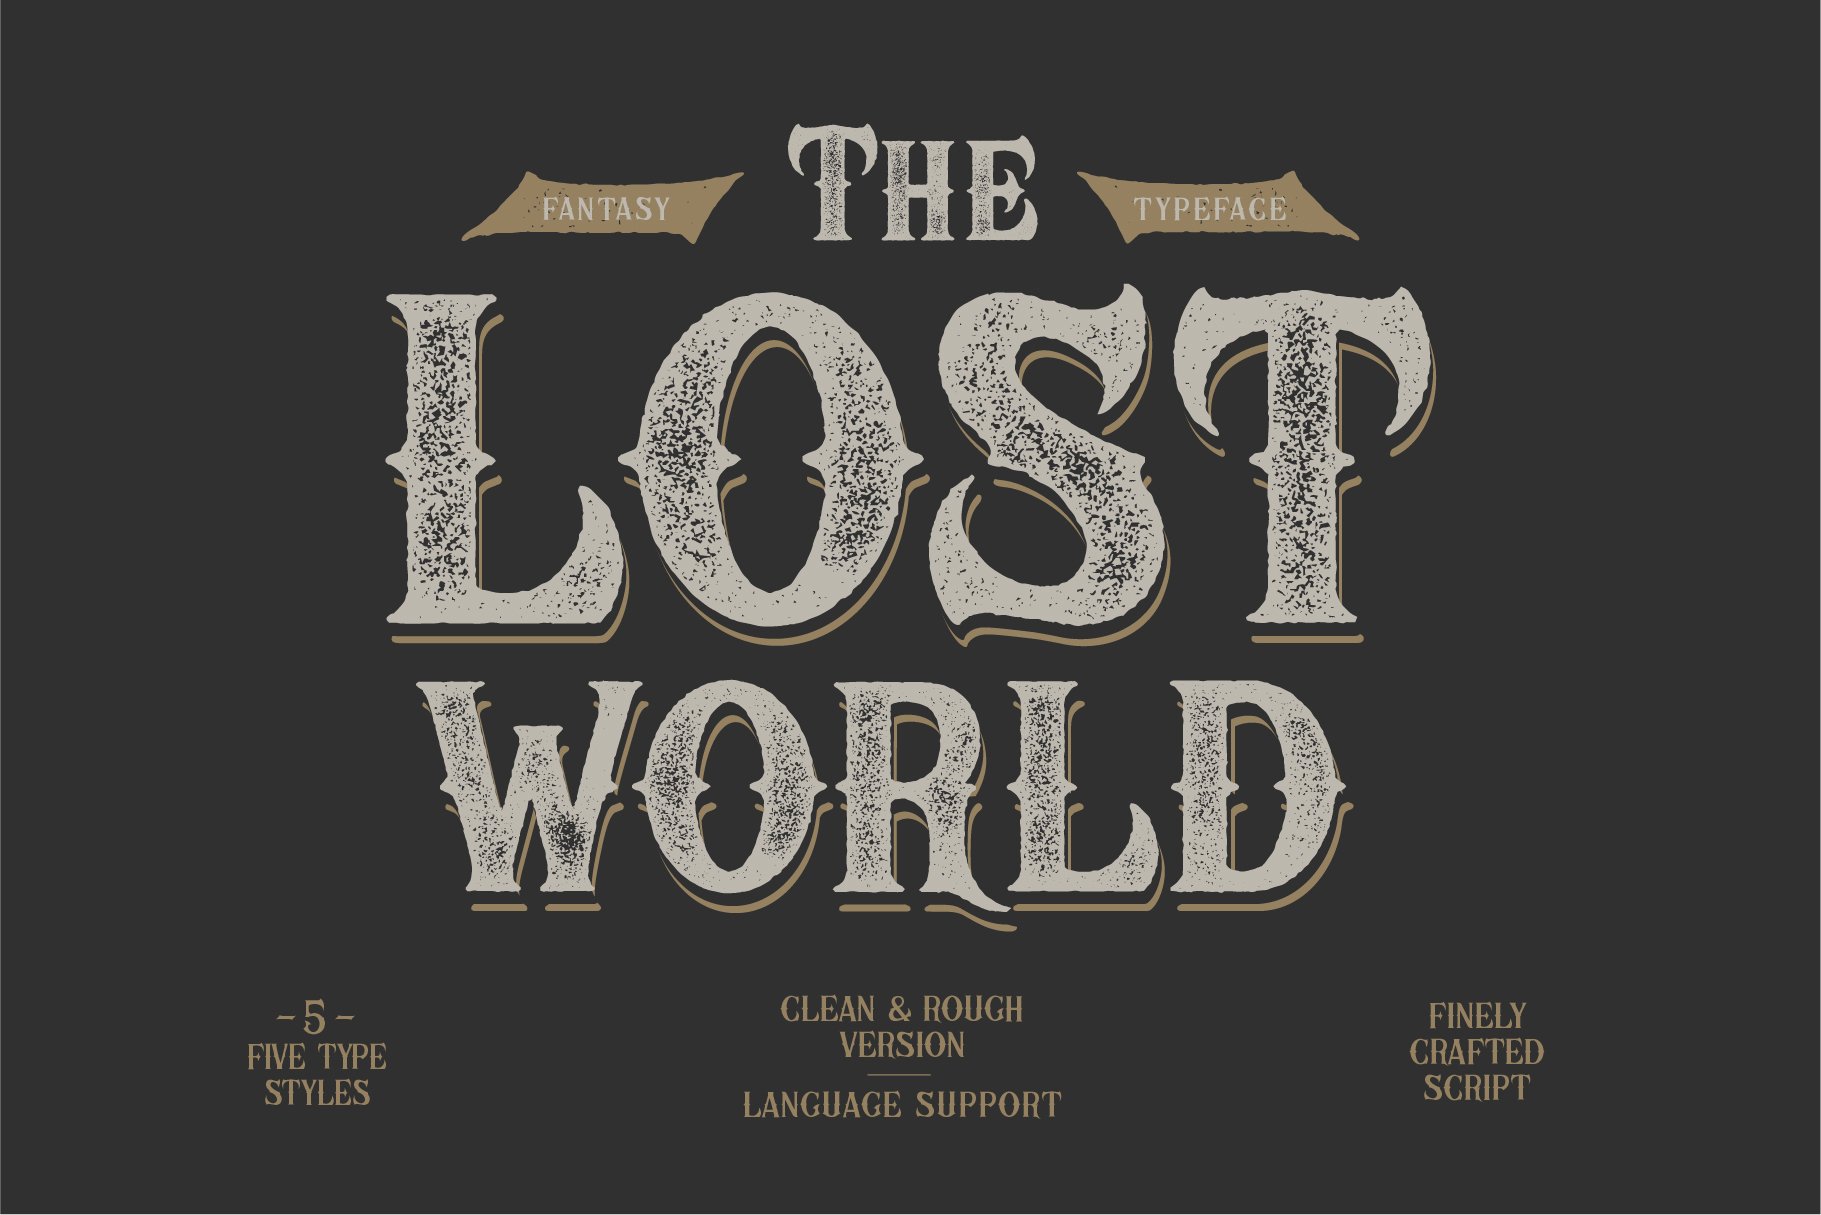 The Lost World cover image.